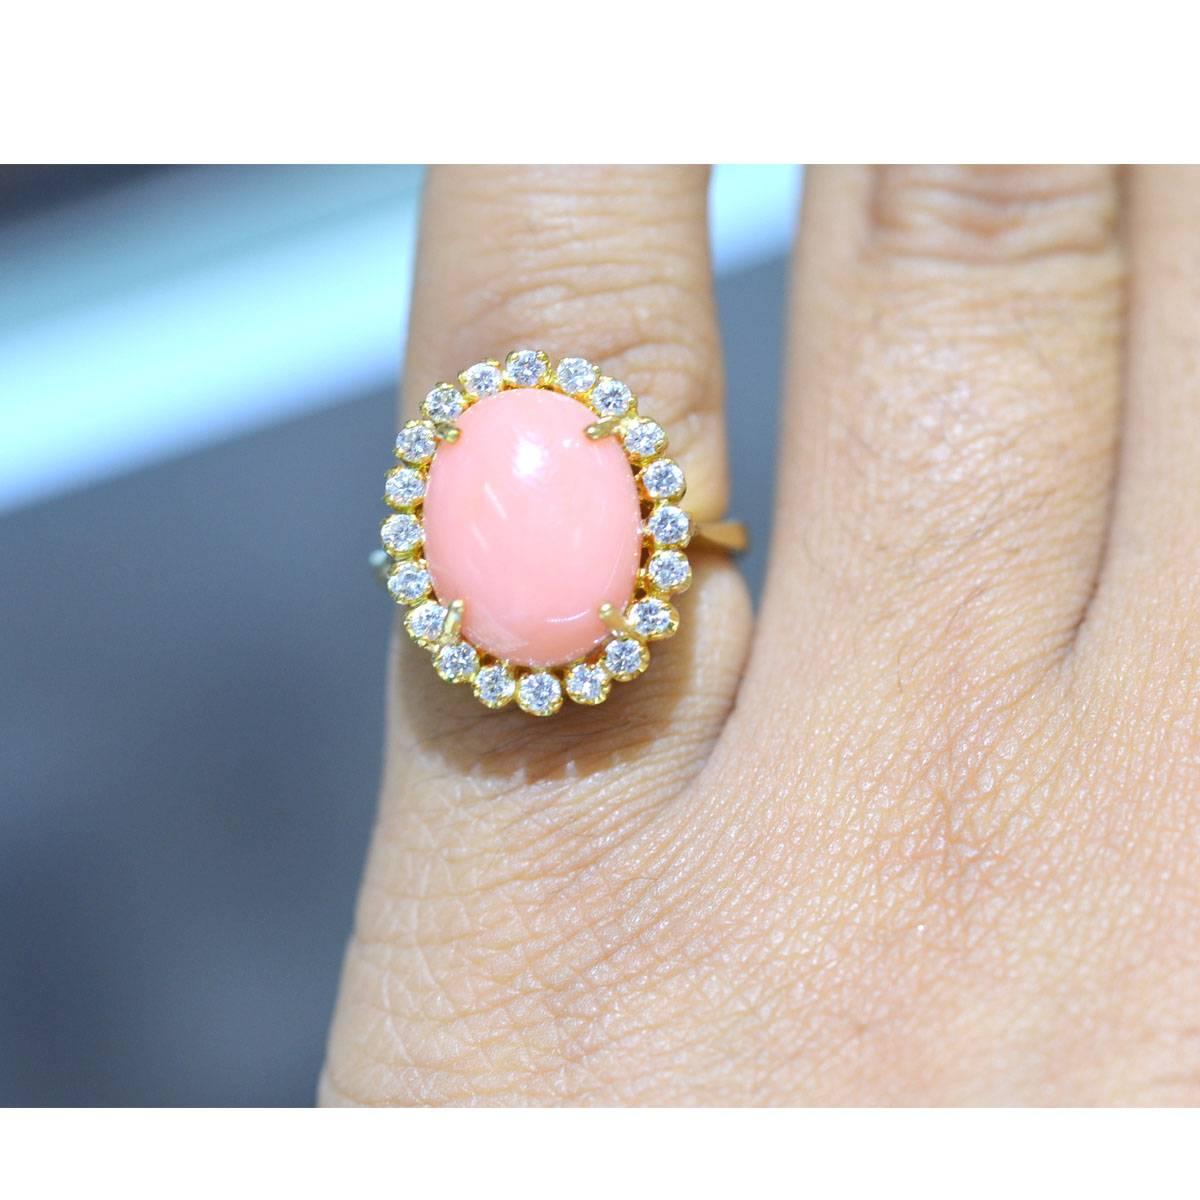 Tiffany & Co. 18 Karat Yellow Gold Oval Coral Stone Ring with Diamonds 2